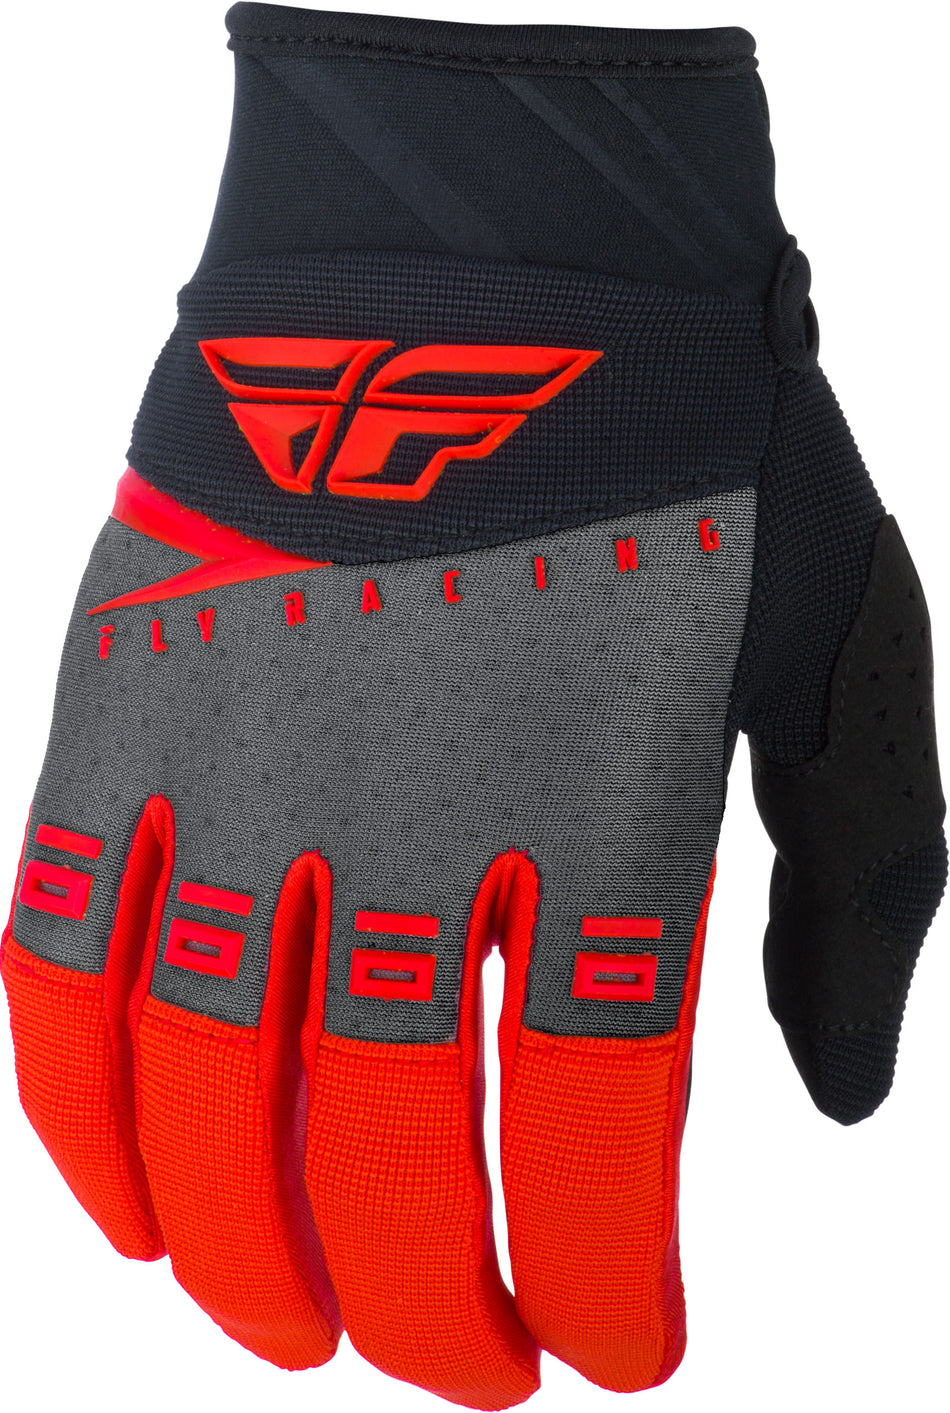 FLY RACING F-16 Gloves Red/Black Grey Sz 11 372-91211